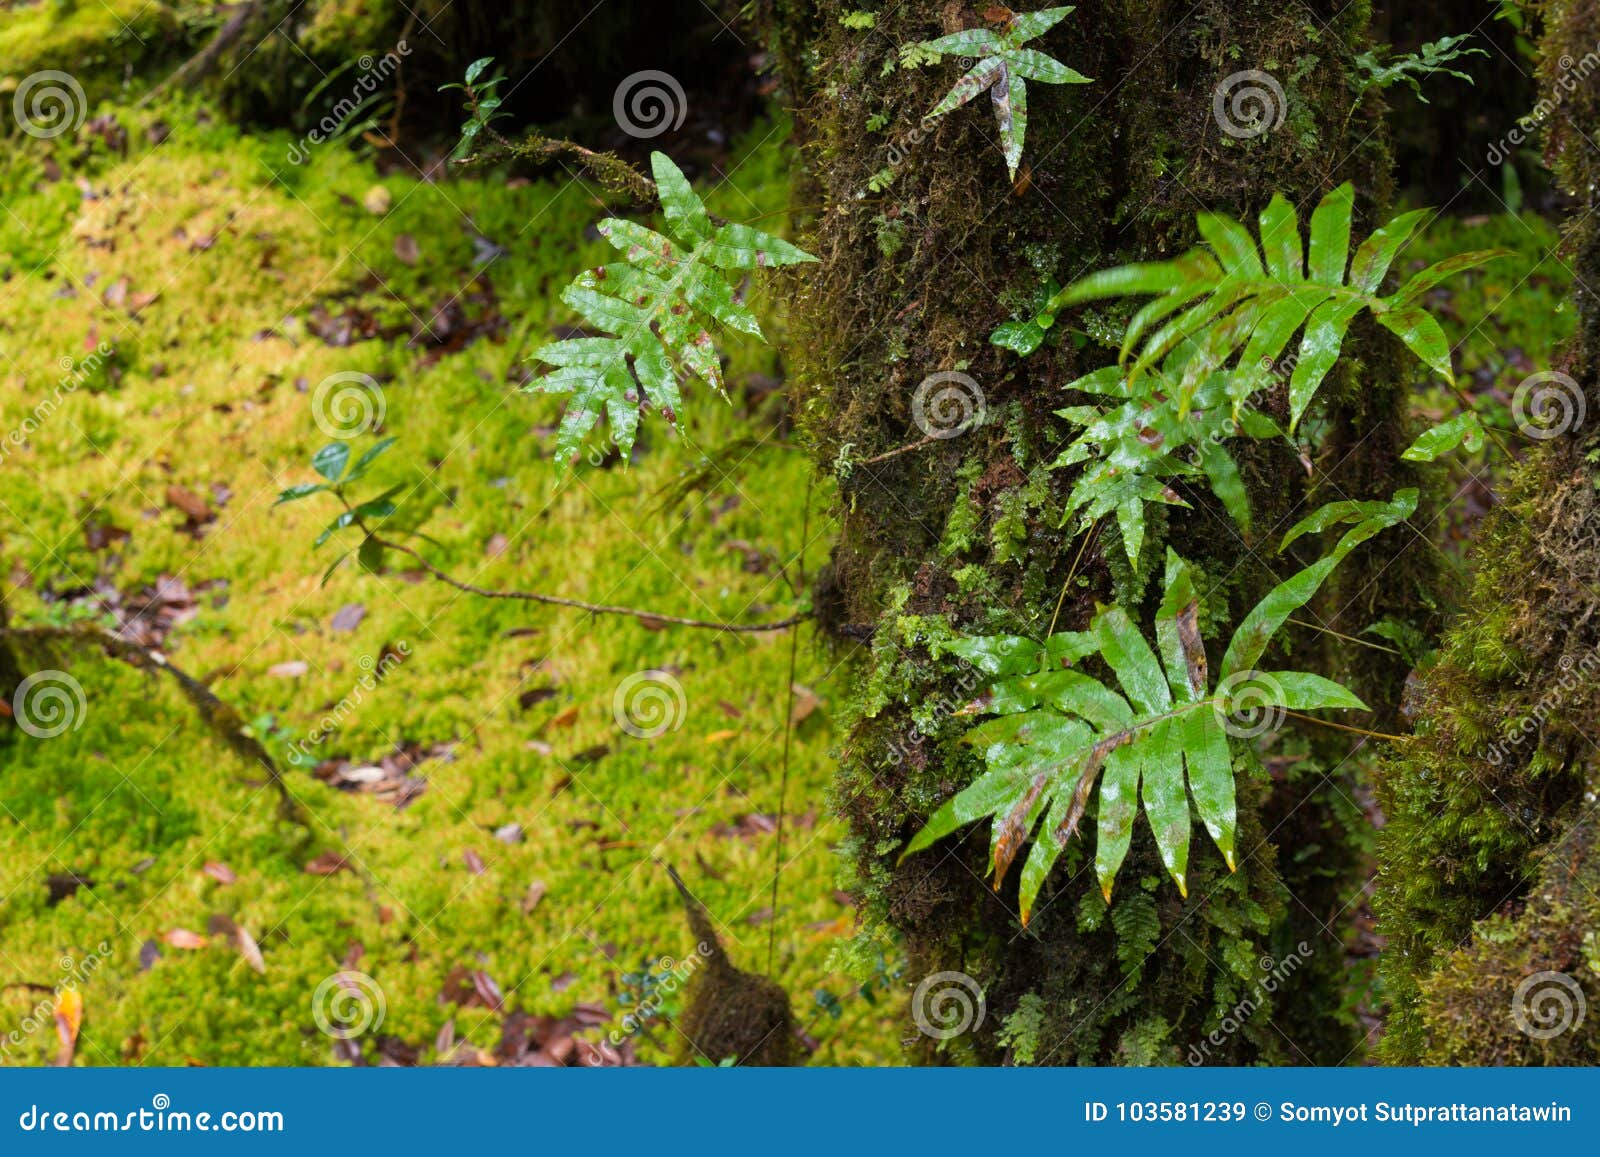 Rain Forest Background With Green Mosses And Fern Stock Image Image Of Intanond Chiang 103581239